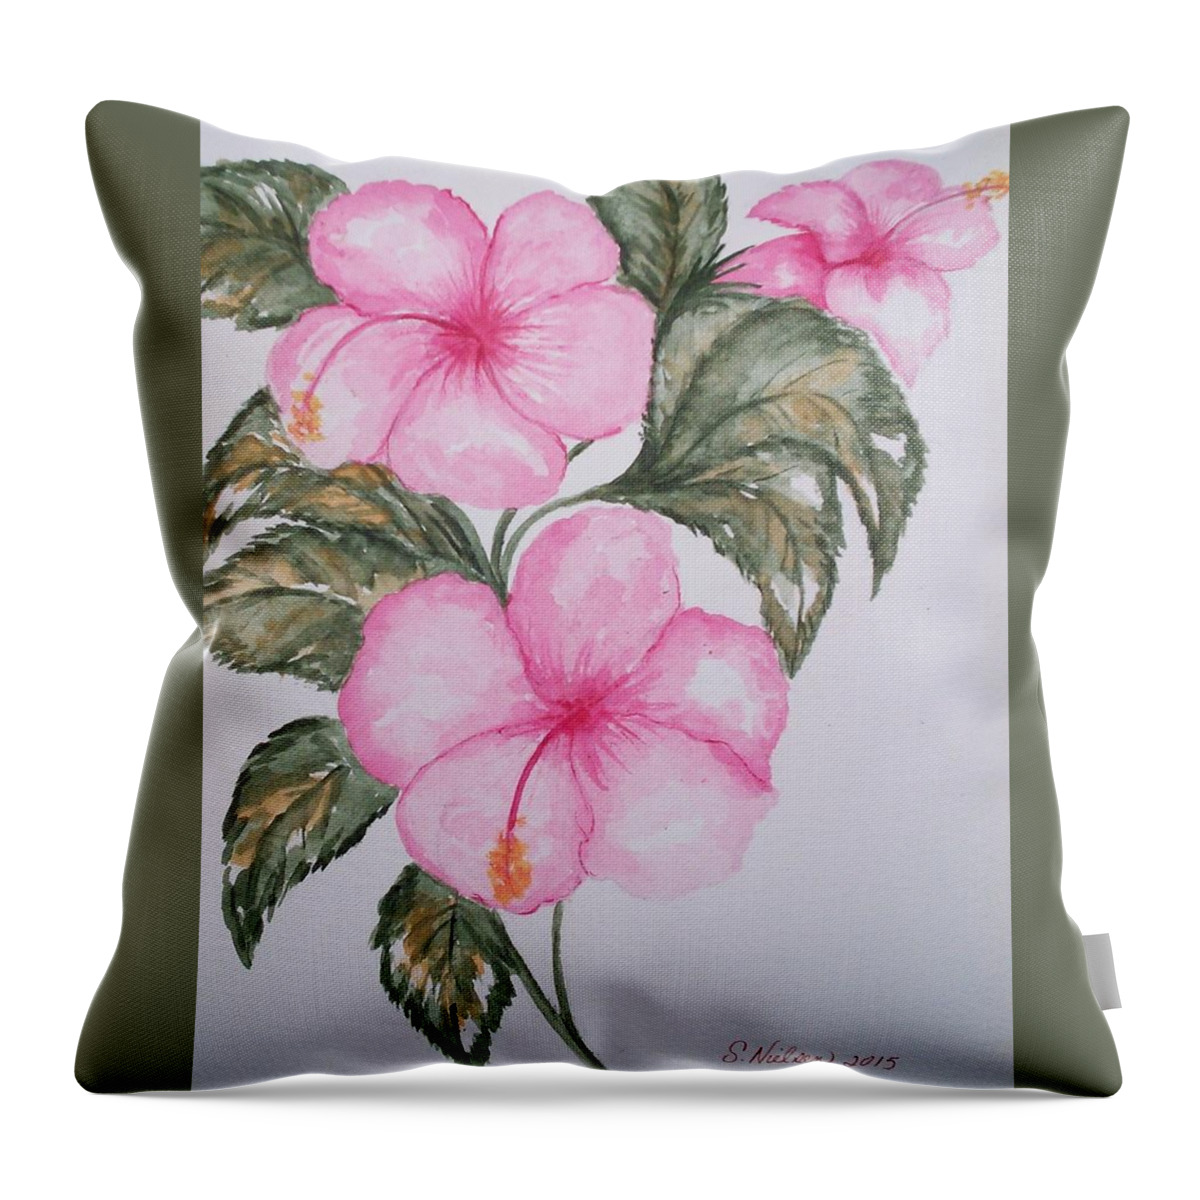 Hibiscus Throw Pillow featuring the painting Pink Hibiscus by Susan Nielsen